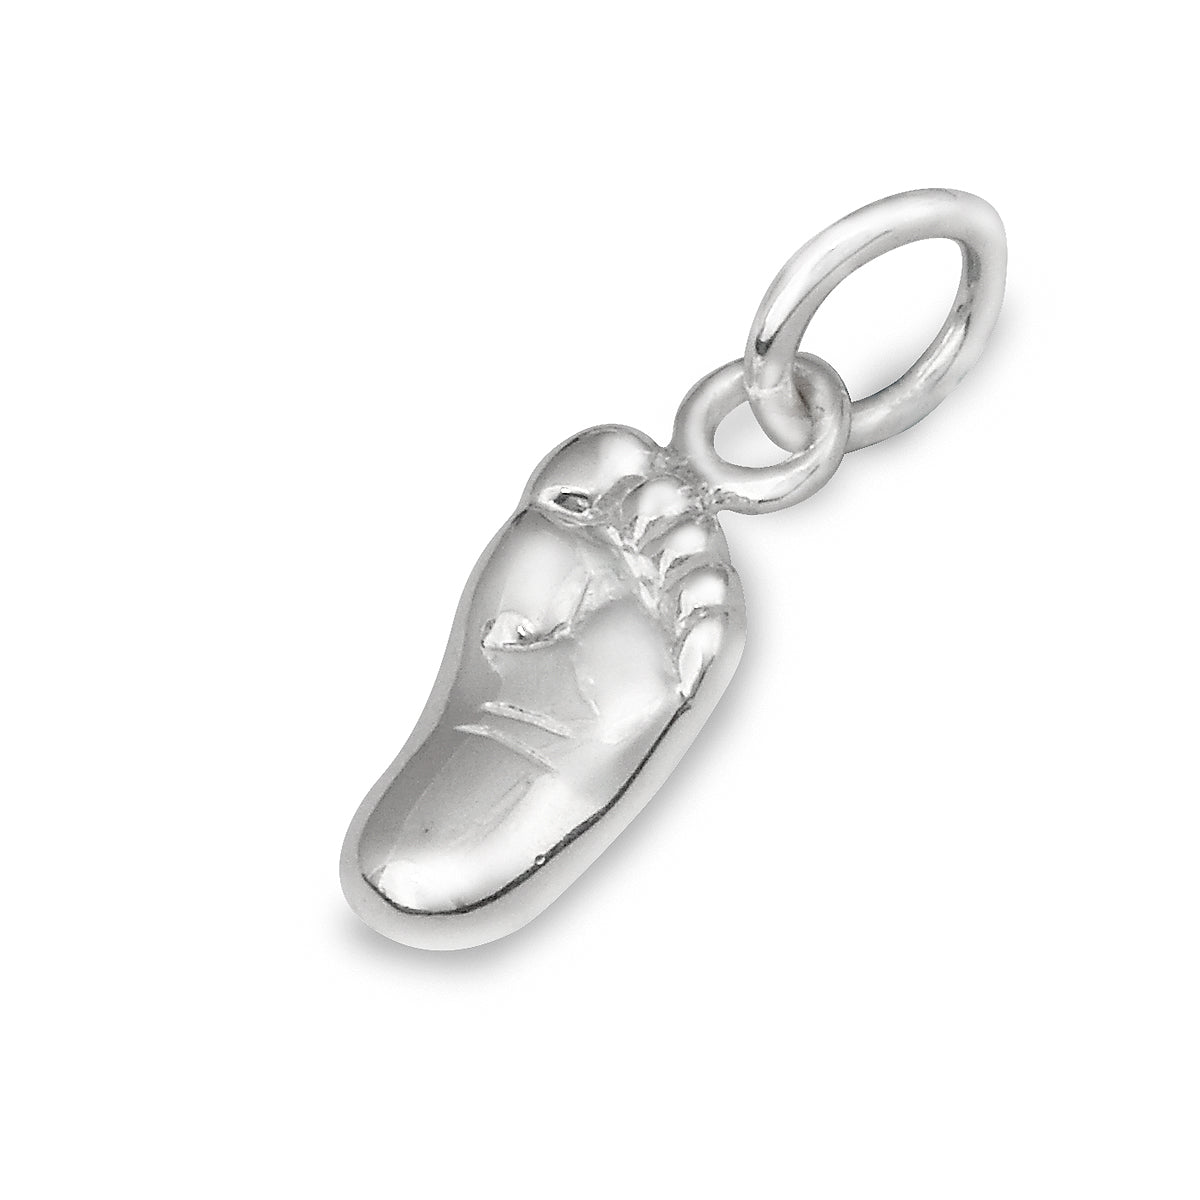 Exquisite Tiny Toes - New Baby Charm